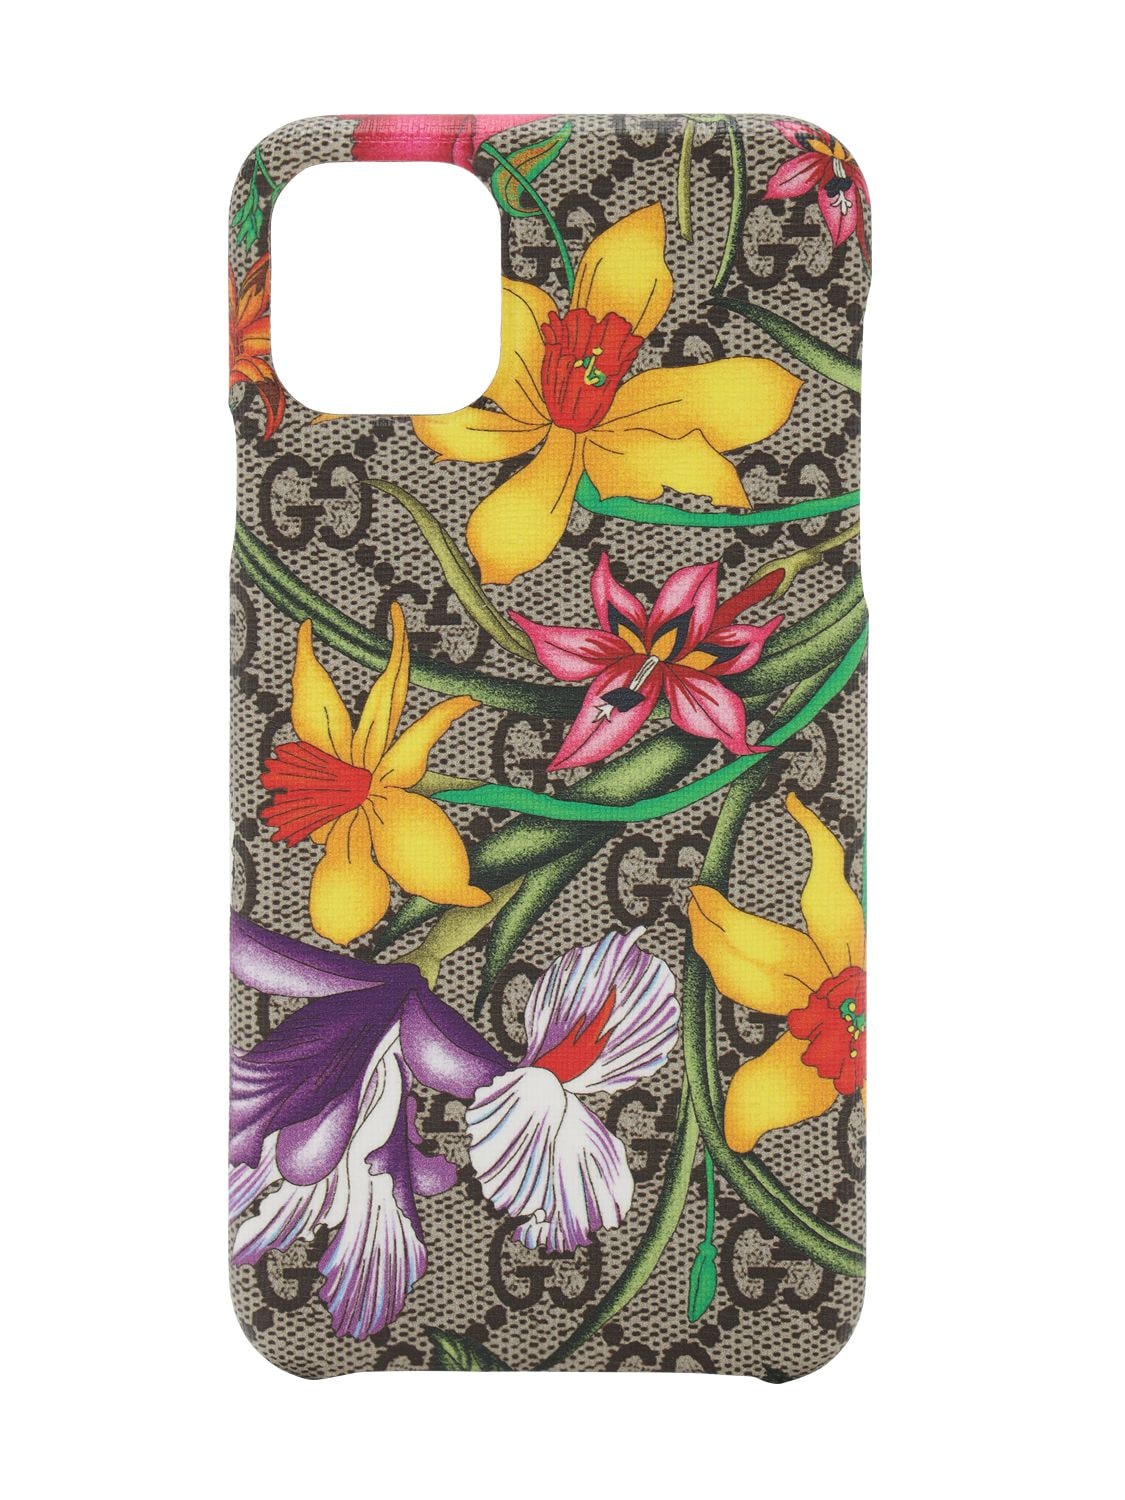 GUCCI GG FLORA IPHONE 11 PRO MAX COVER,72IIJS025-ODQ2MG2